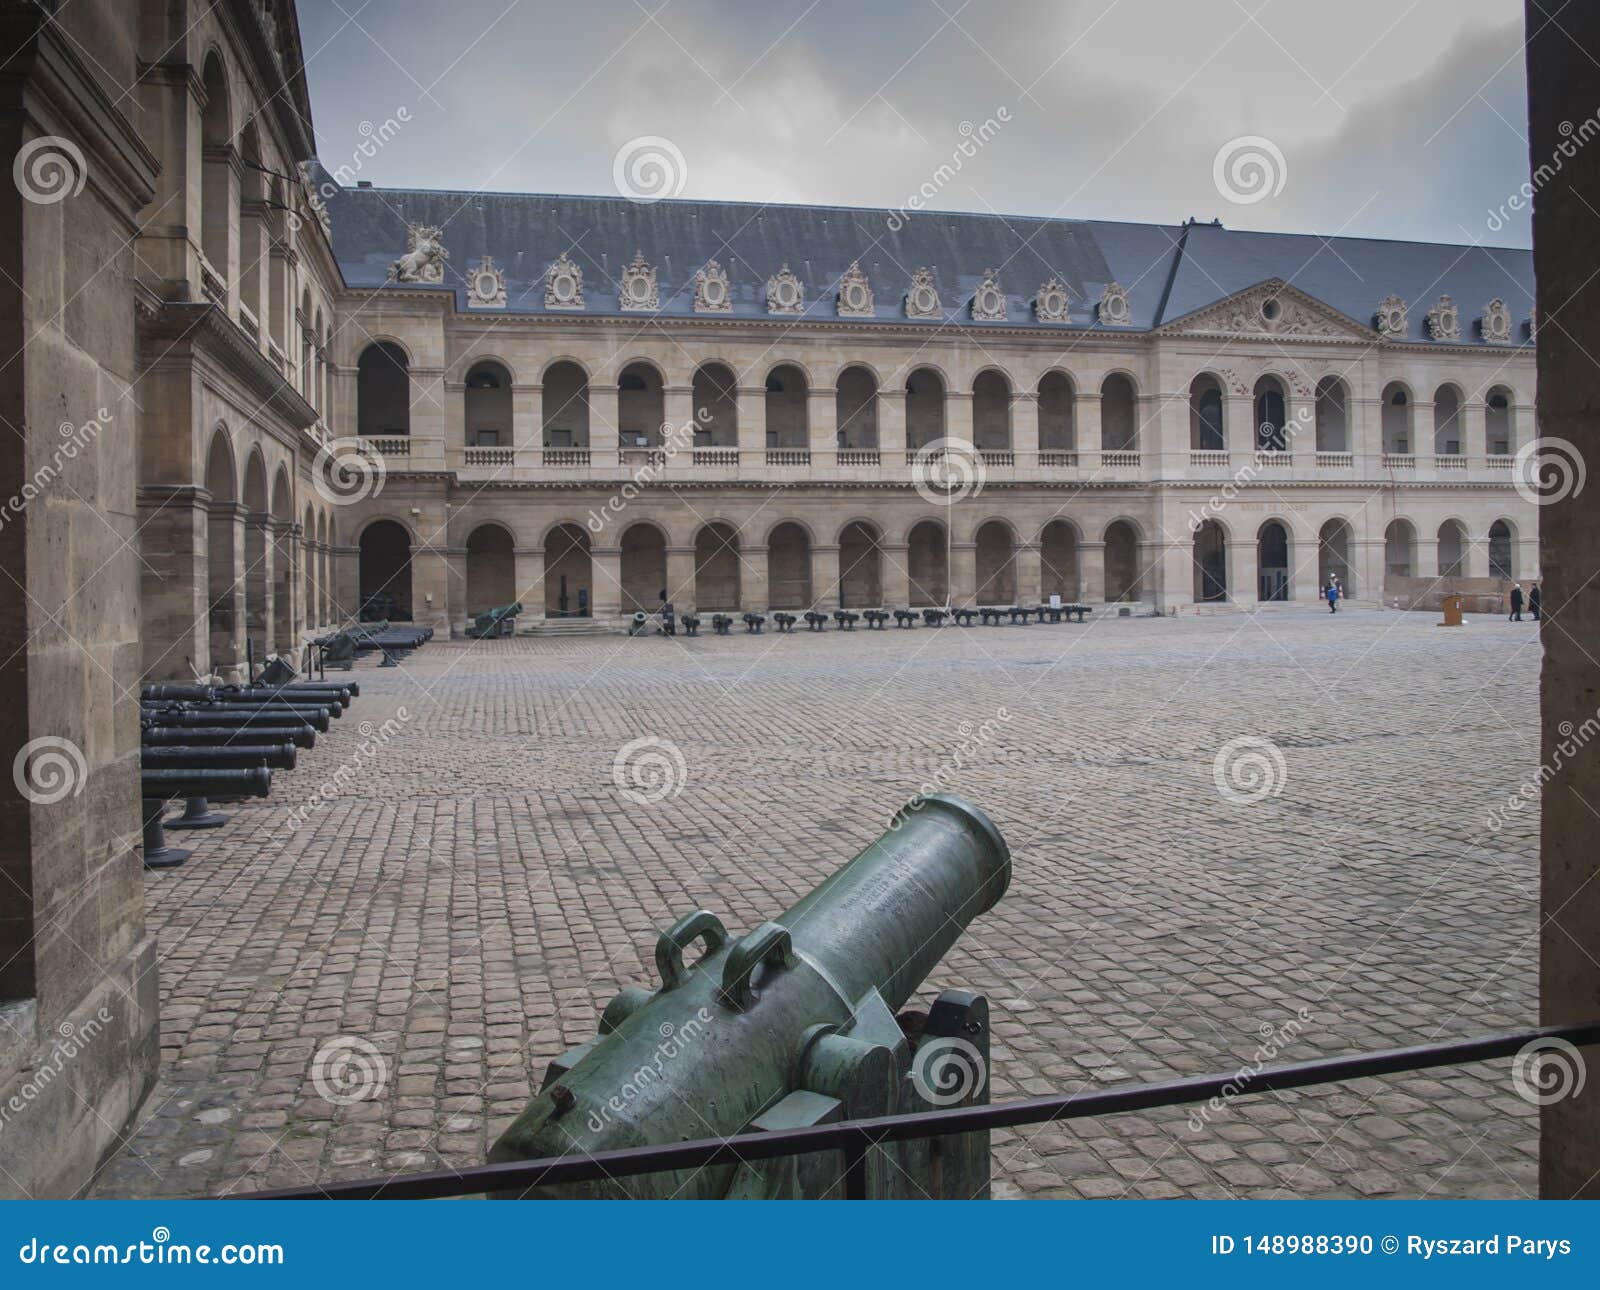 Inner courtyard of the palace Les Invalides with old cannons in Paris, which houses, inter alia, an army museum. France